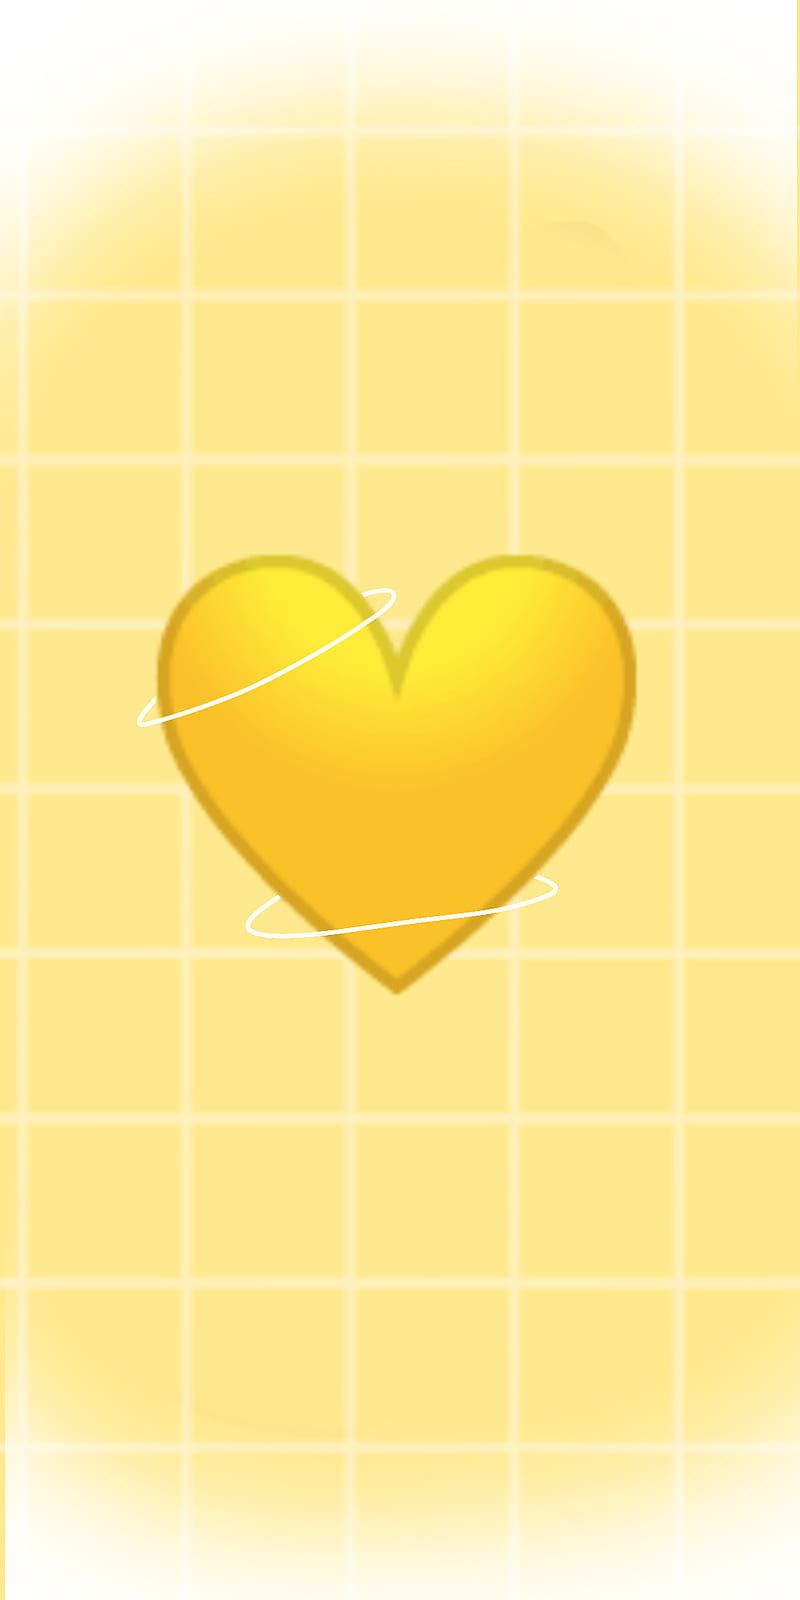 A yellow heart on top of some squares - Emoji